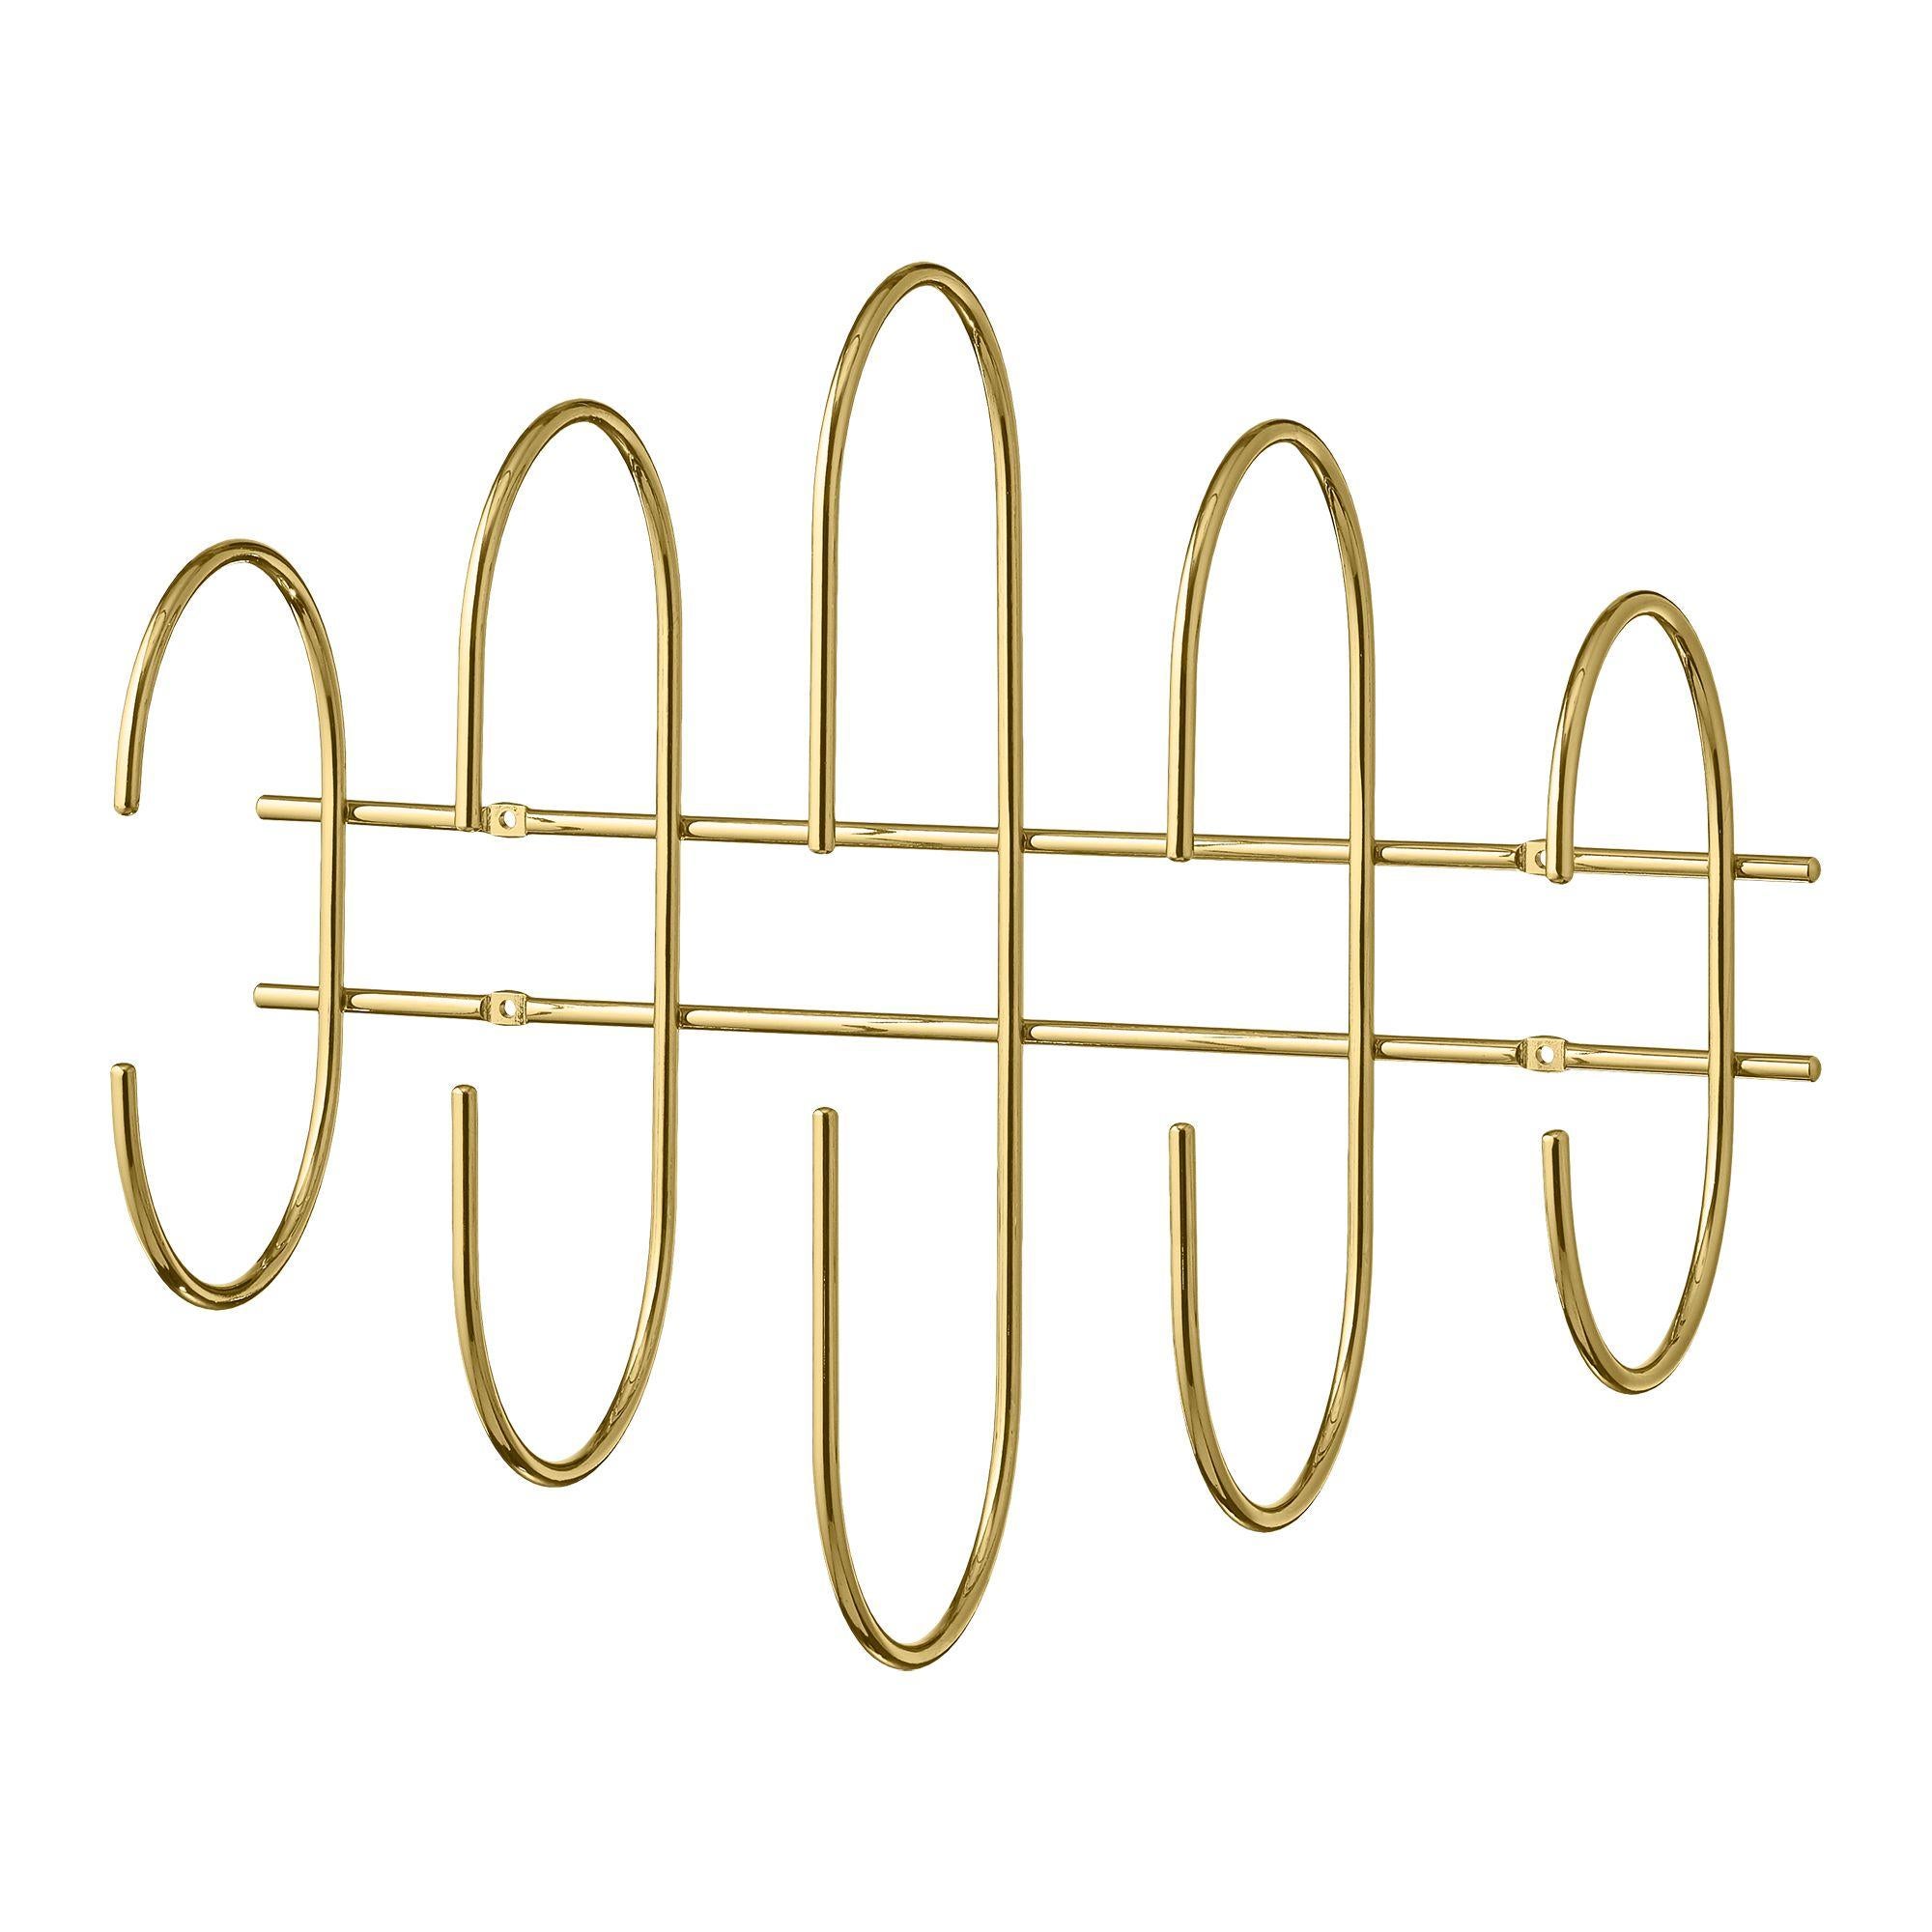 Small gold minimalist coat rack
Dimensions: D 52 x W 15.8 x H 41 cm 
Materials: Steel w. Brass Plating, Chrome Plating & Matte Powder Coating.
Available in Silver and Black, and in size Large.


MOVEO means movement, which is truly what this